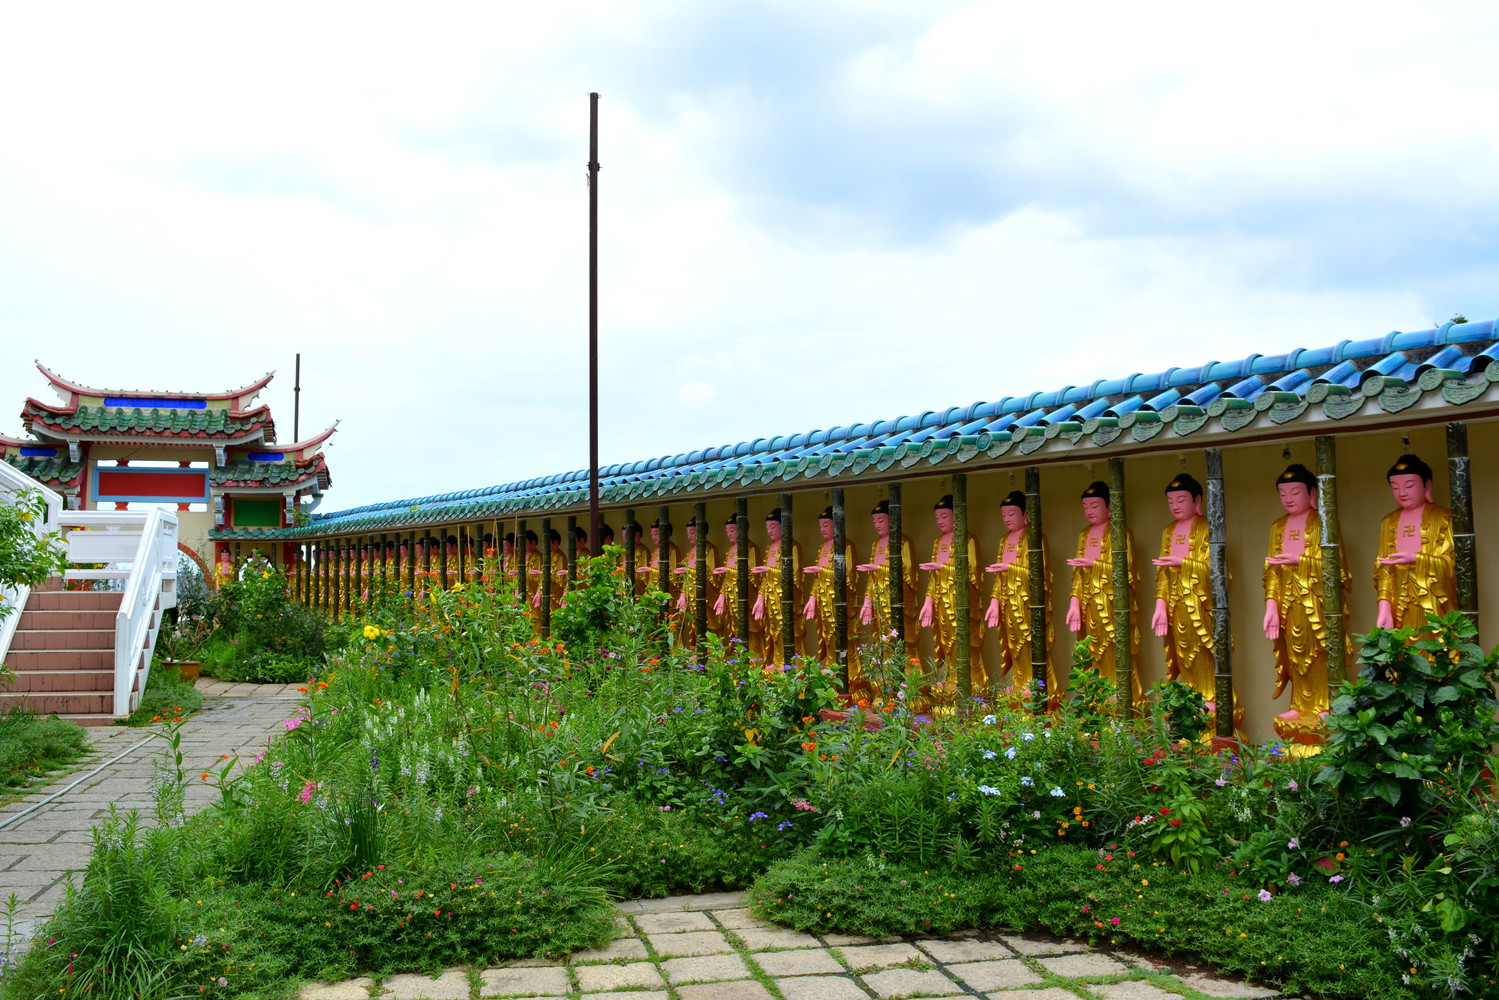 A temple complex with many bronze statues of Buddha